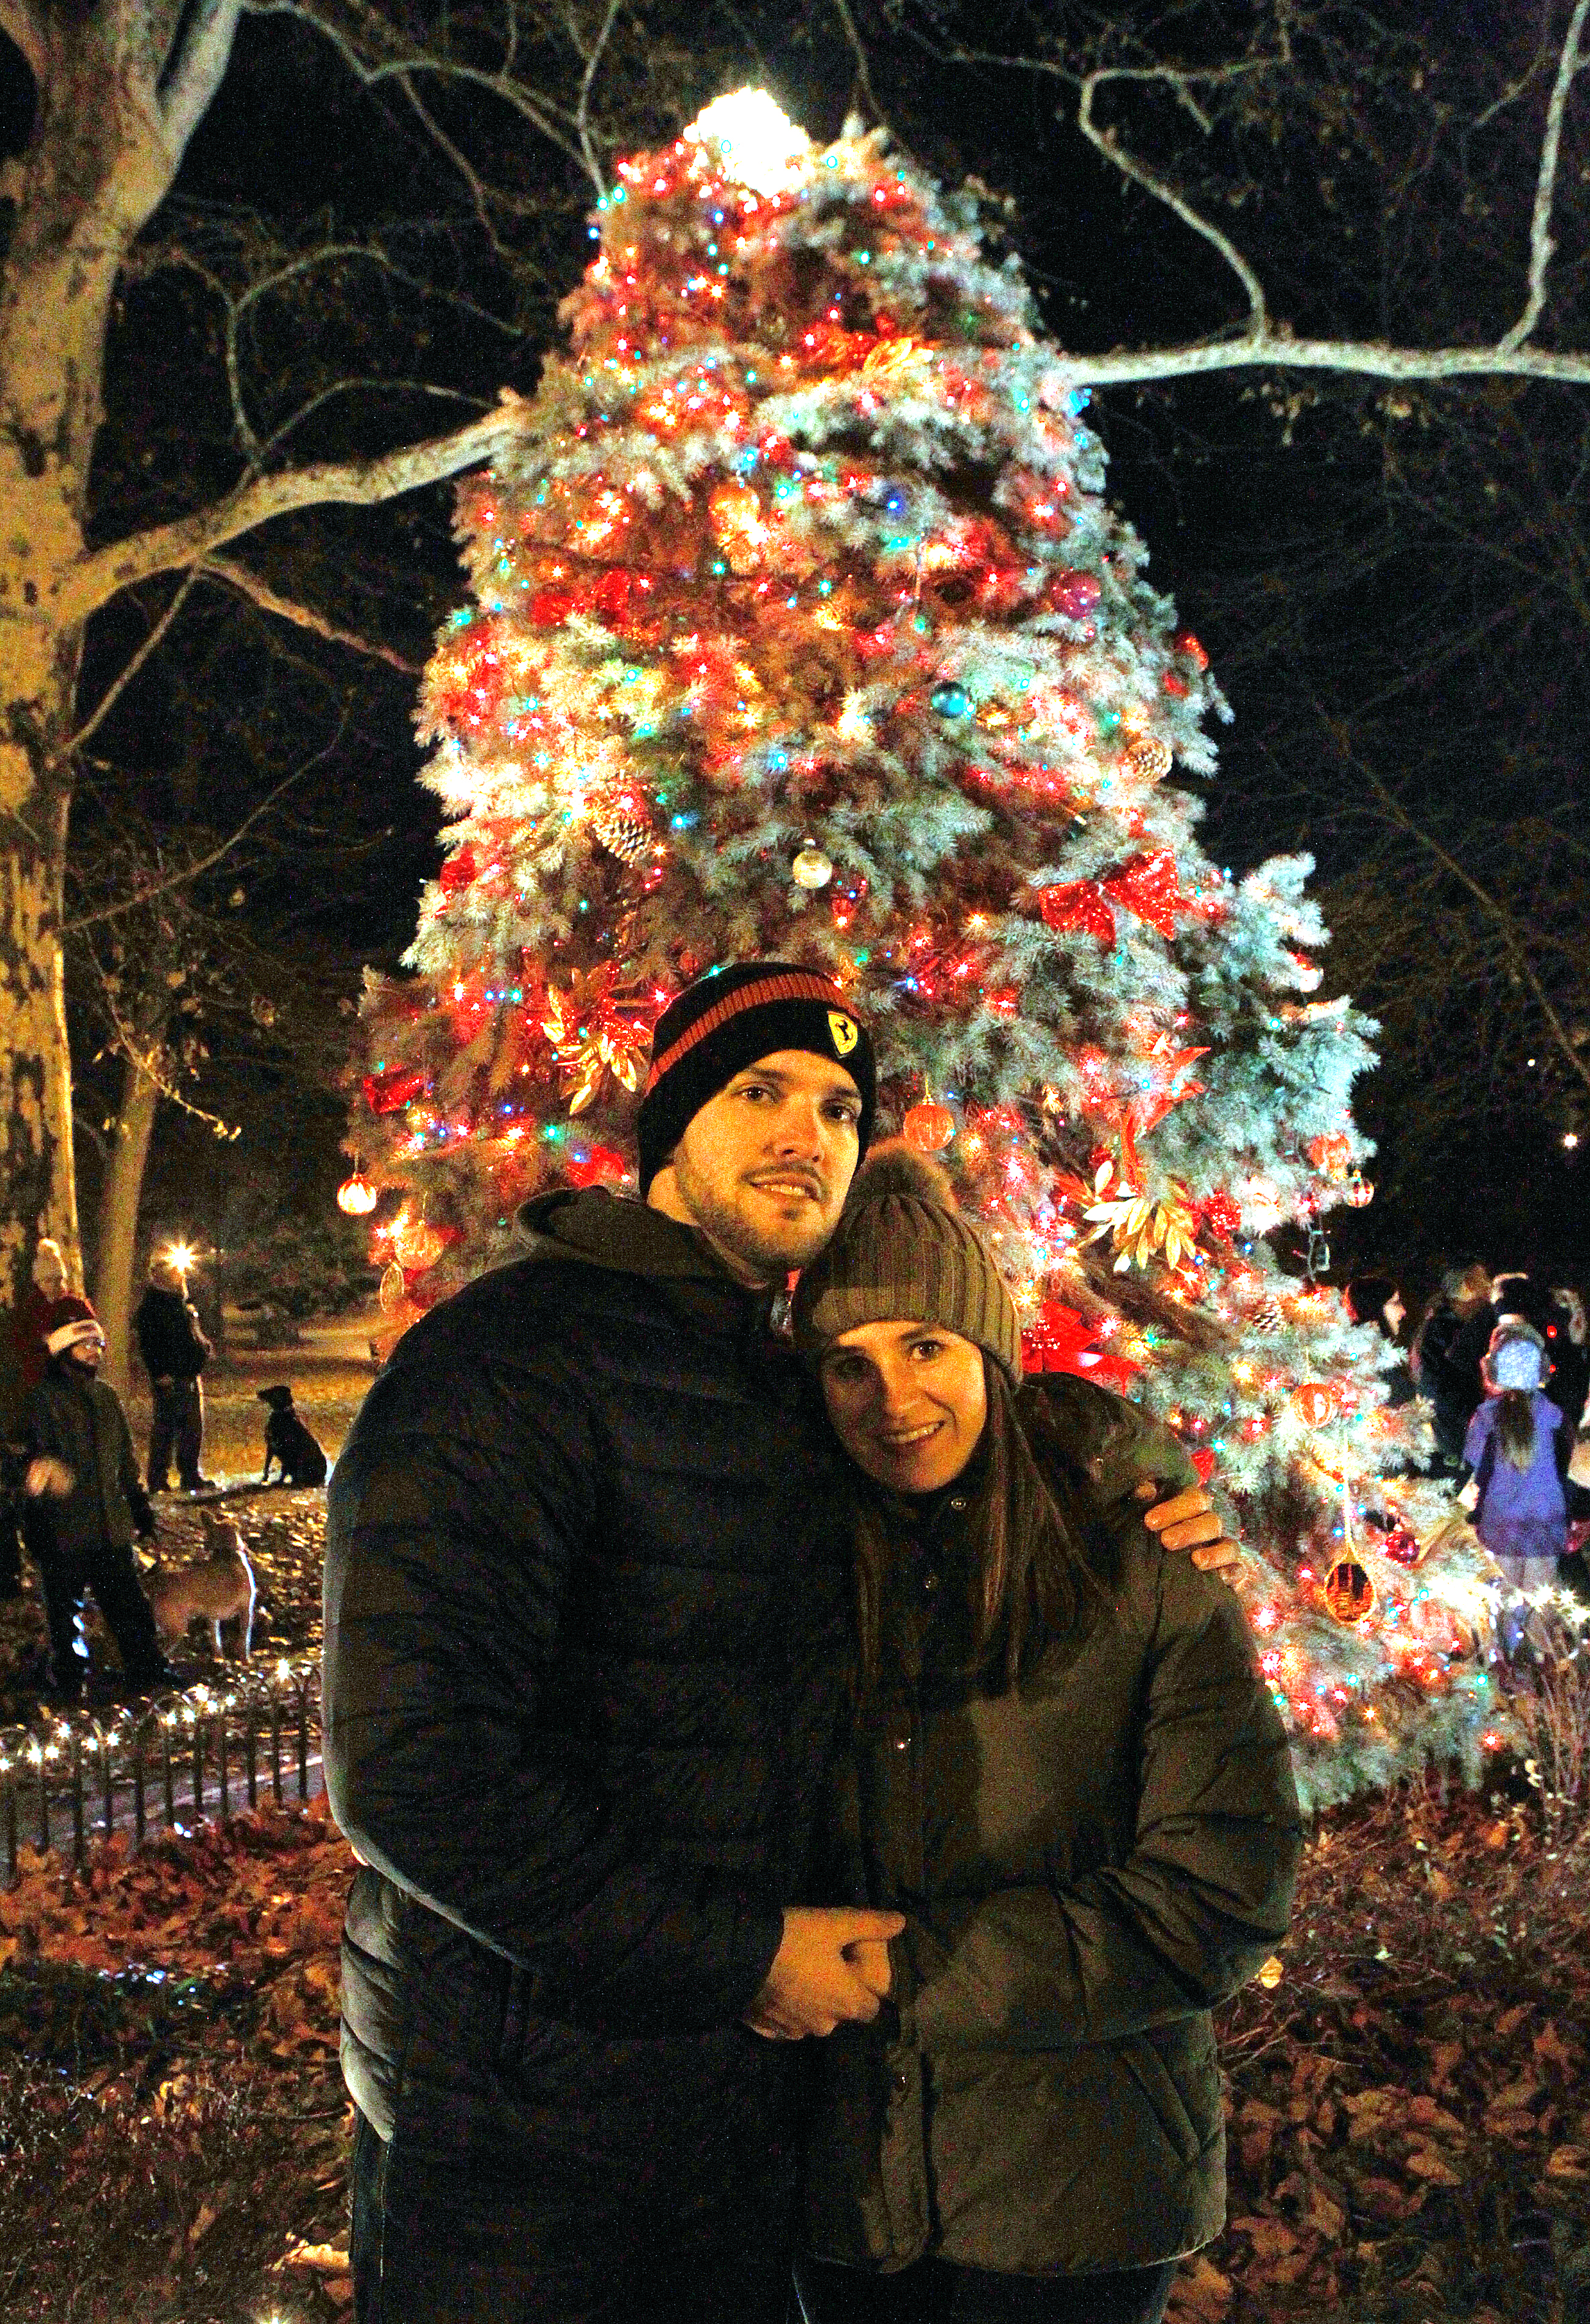 Eric and Erika Landa in front of the lit tree. Photo By Steve Solomonson